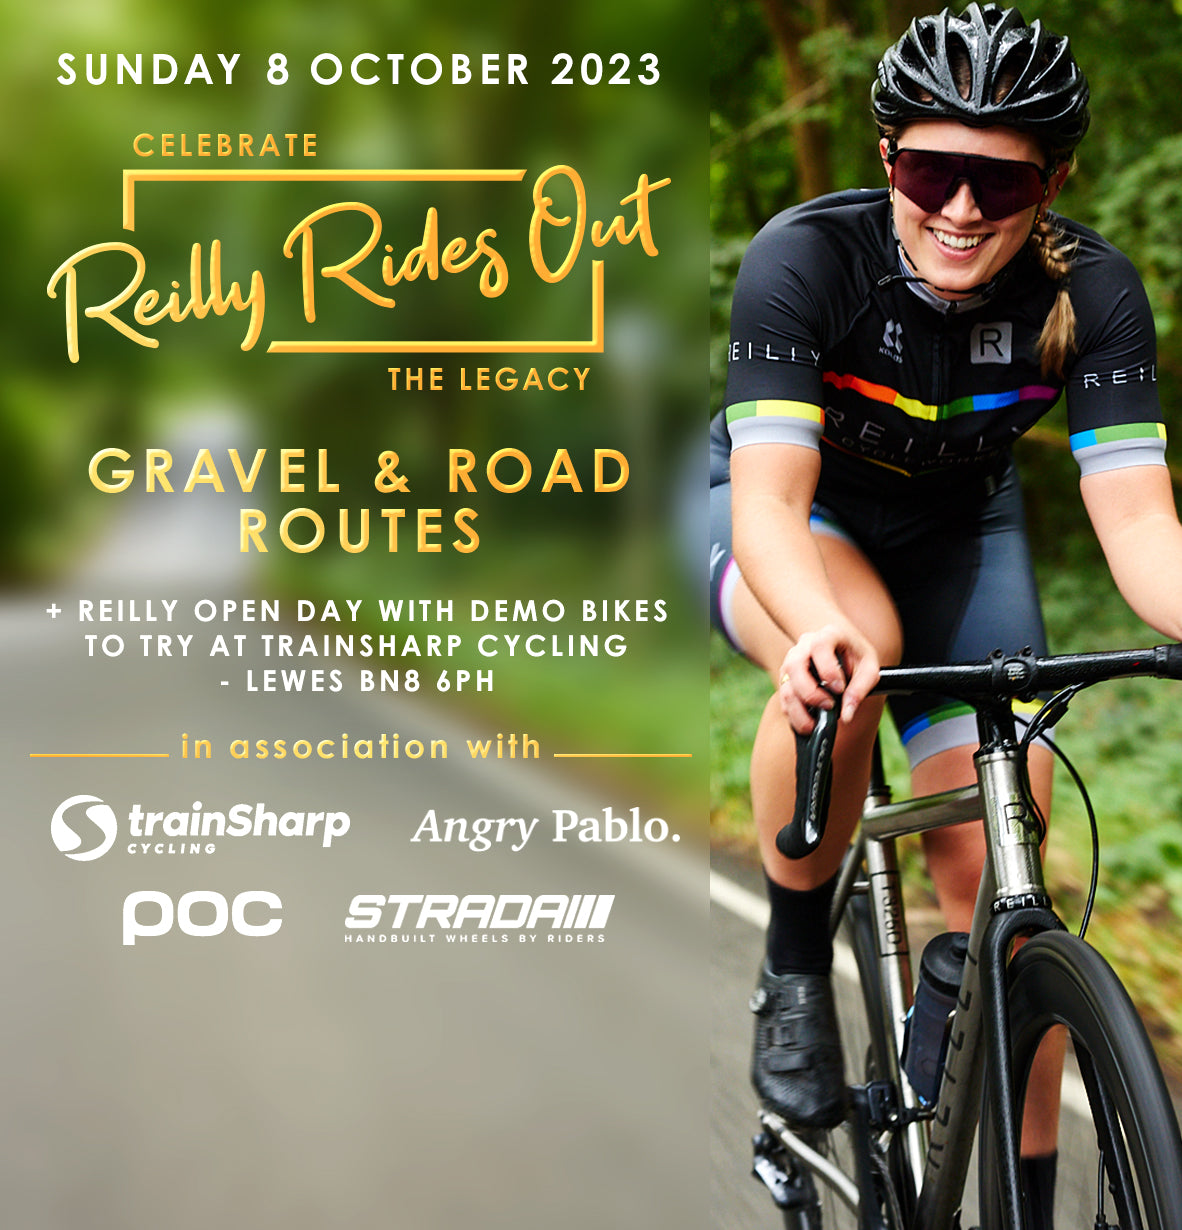 Smiling girl in black cycling kit, black helmet and dark glasses cycles along a road. Plus information about 2023 Reilly Rides Out.